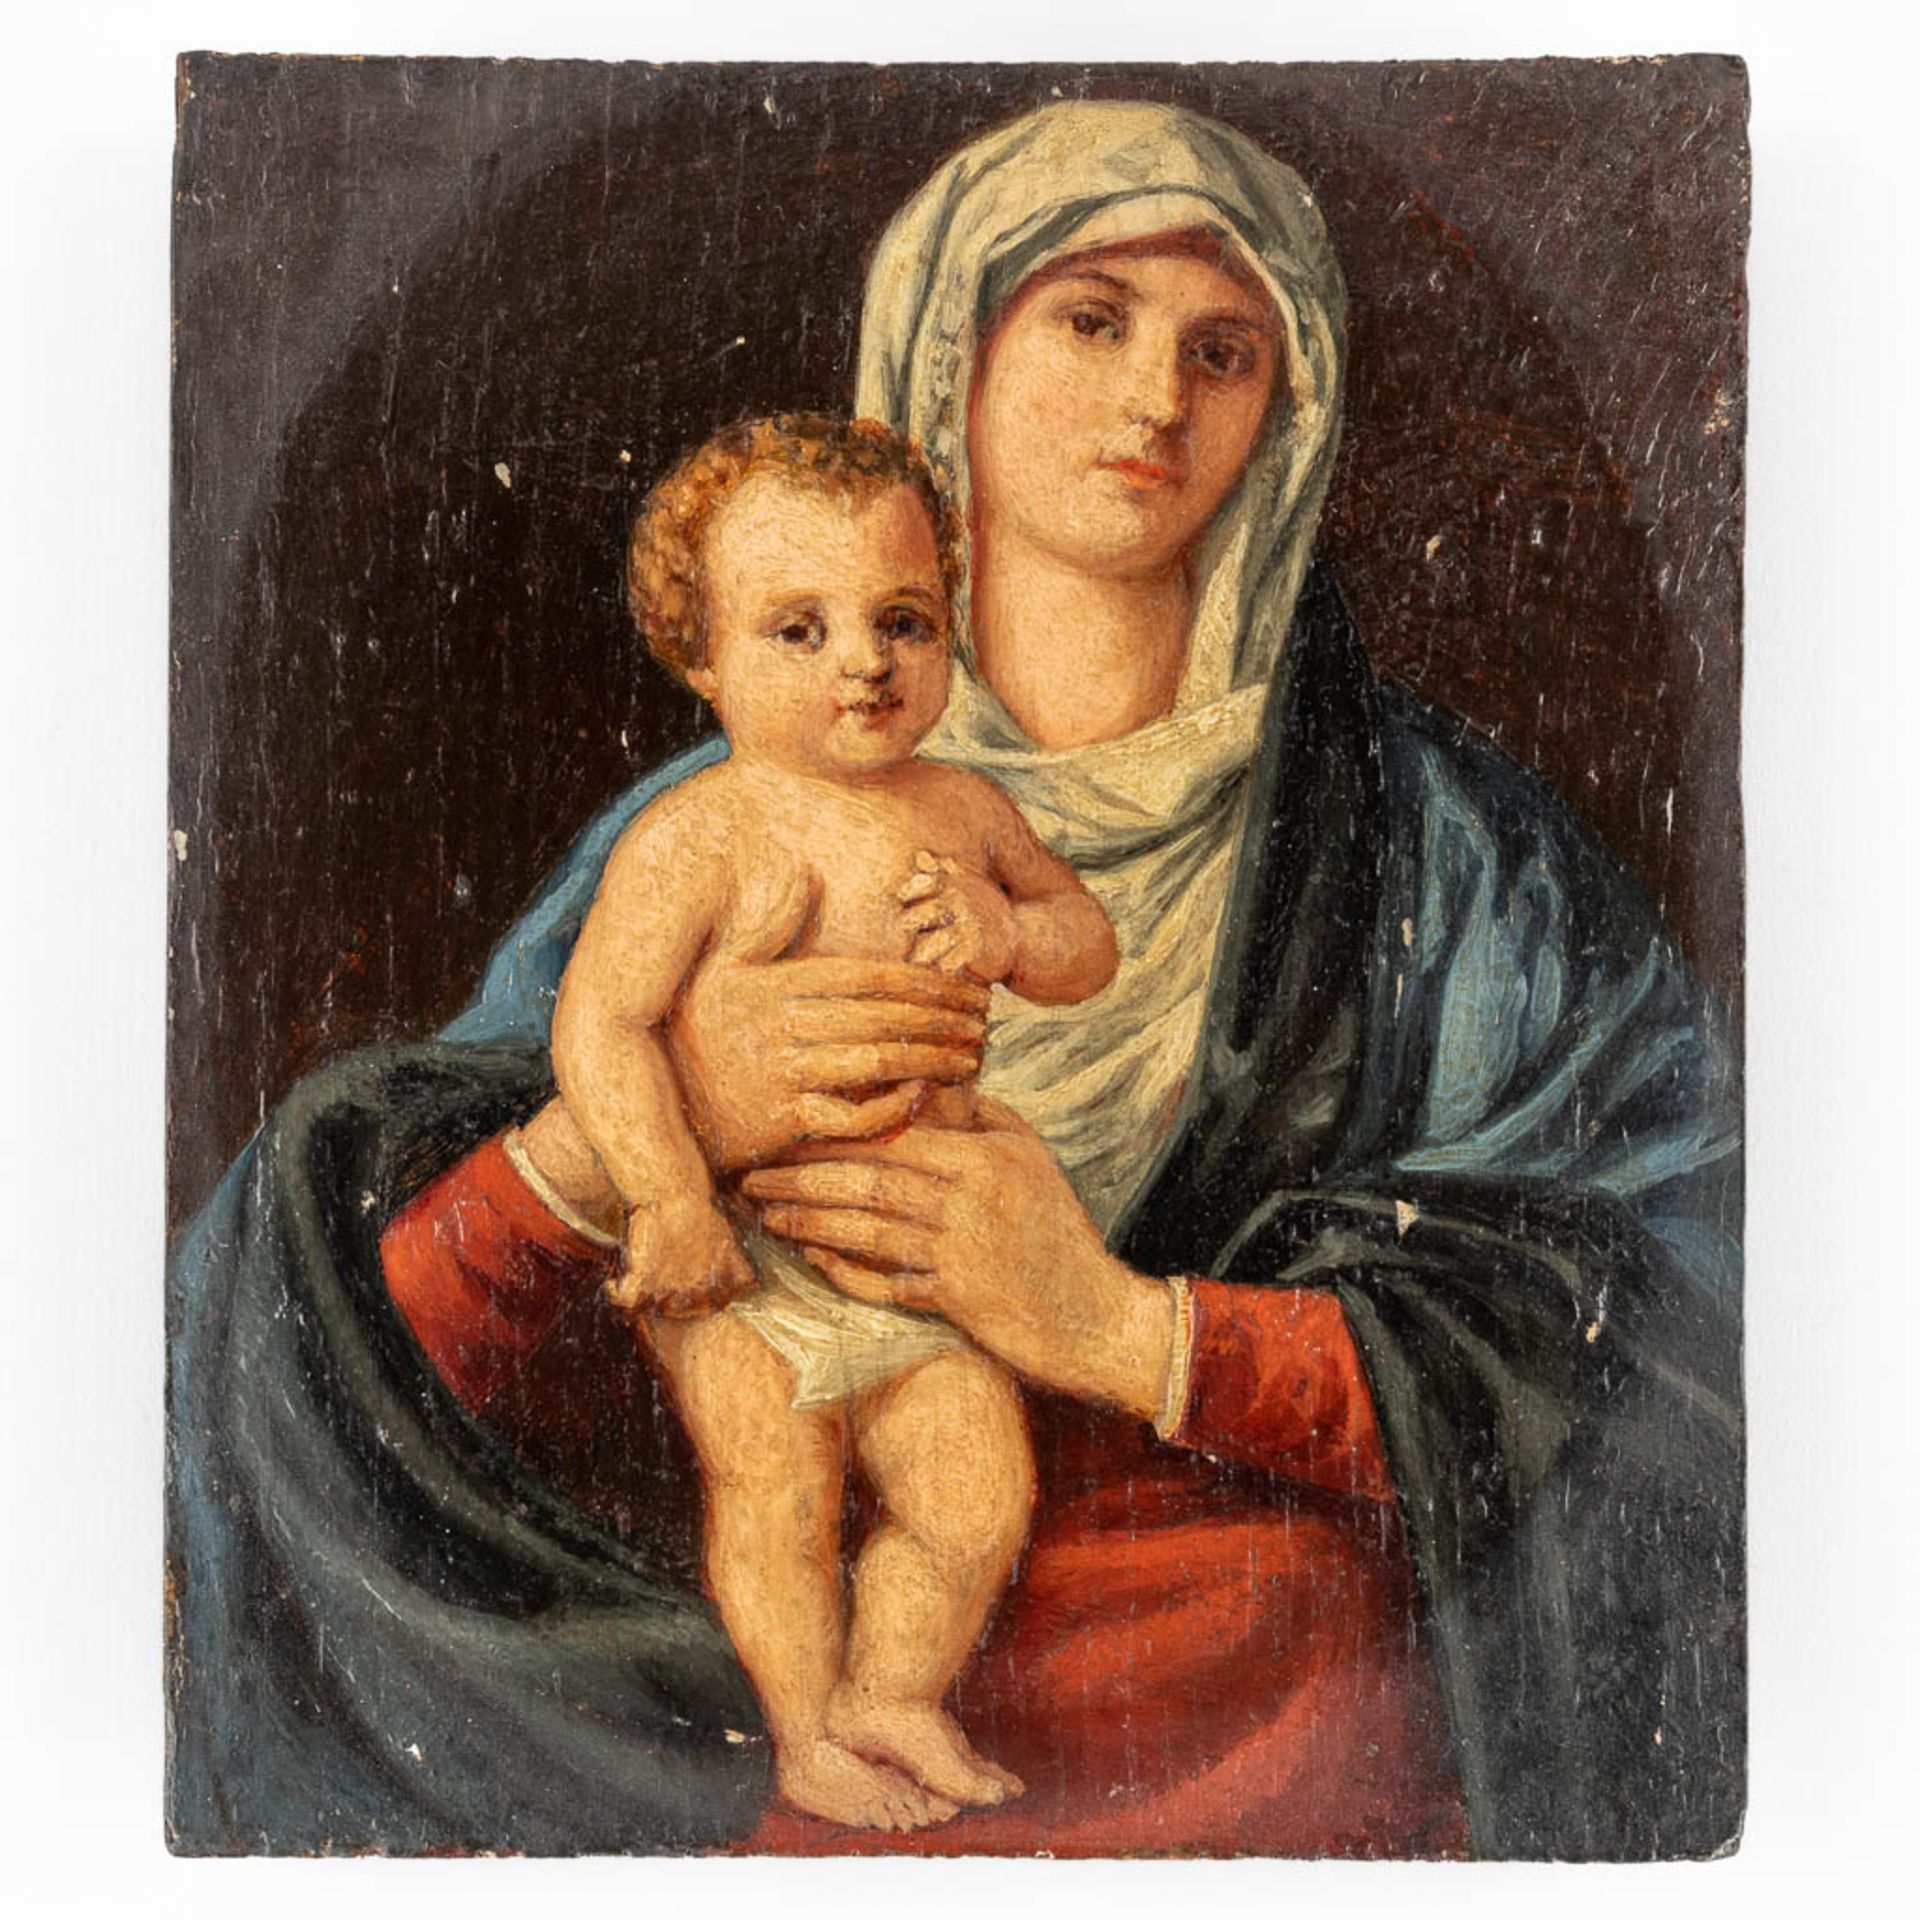 An antique painting 'Madonna with child', oil on panel. Probably 18th C. (W:15 x H:17 cm)